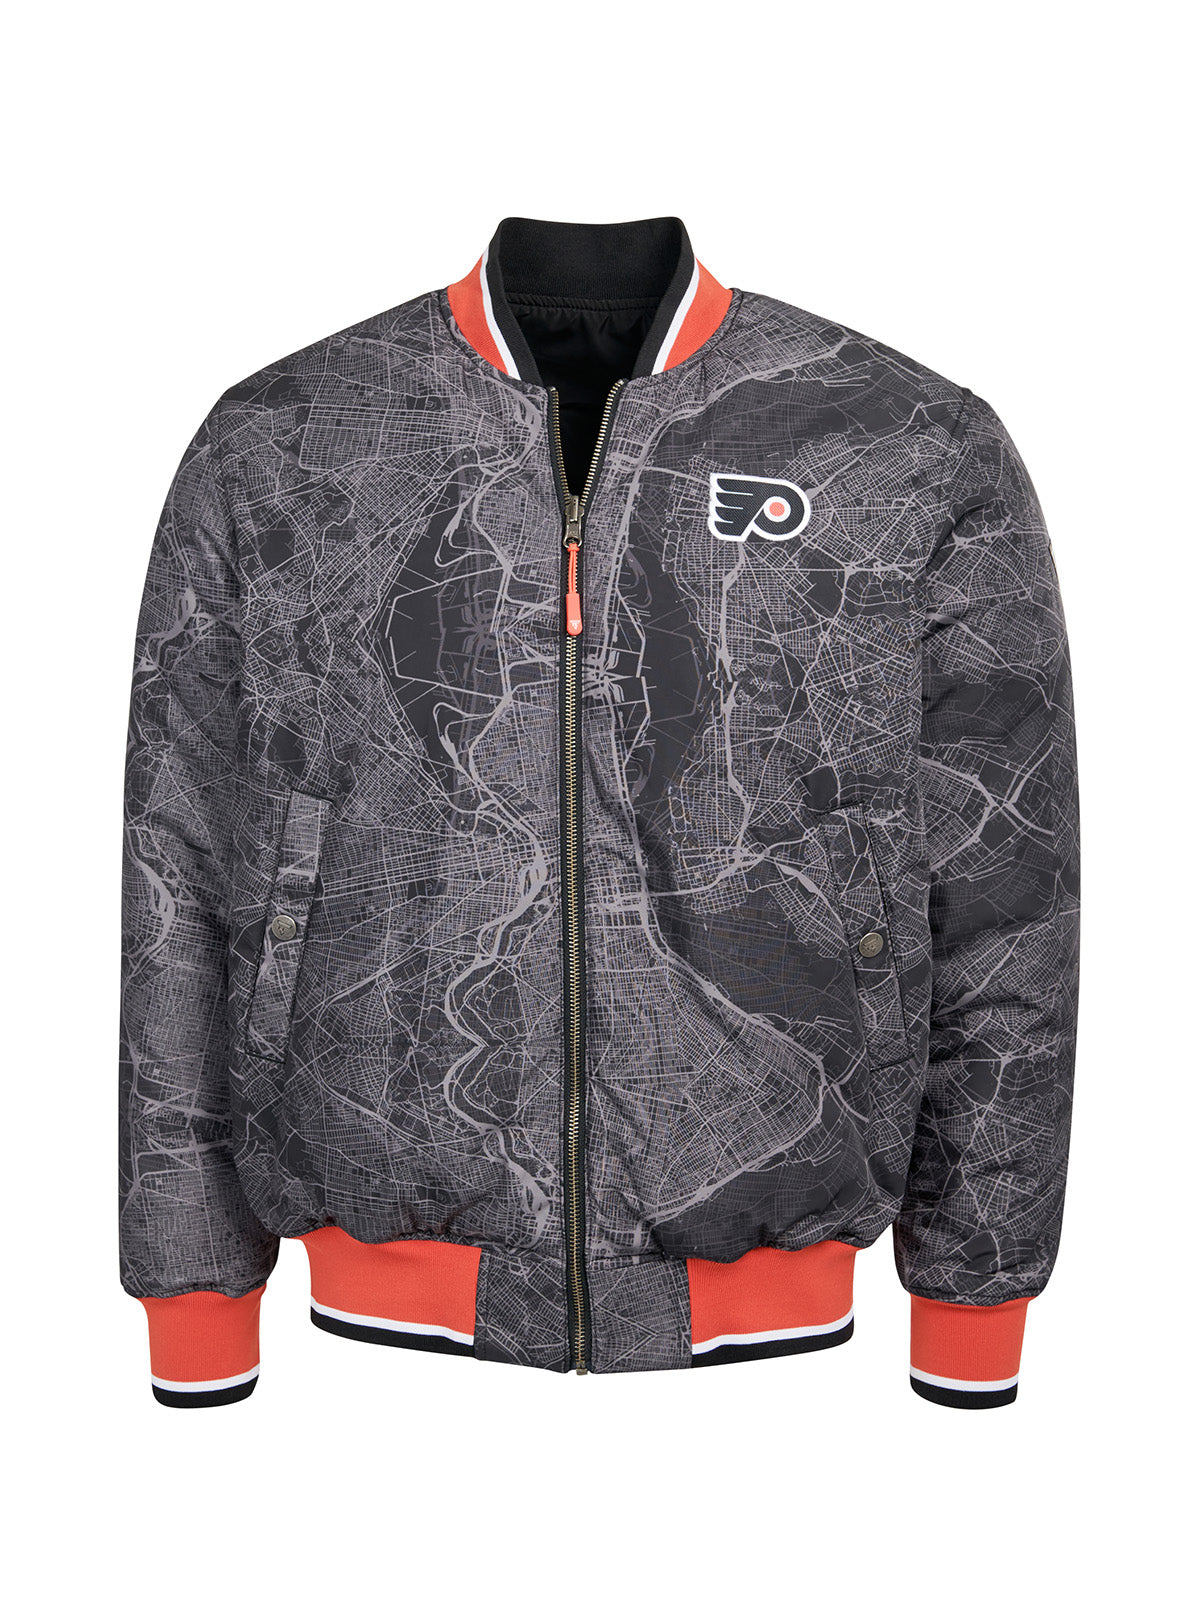 Philadelphia Flyers Bomber - Reversible bomber jacket featuring the iconic Philadelphia Flyers logo with ribbed cuffs, collar and hem in the team colors